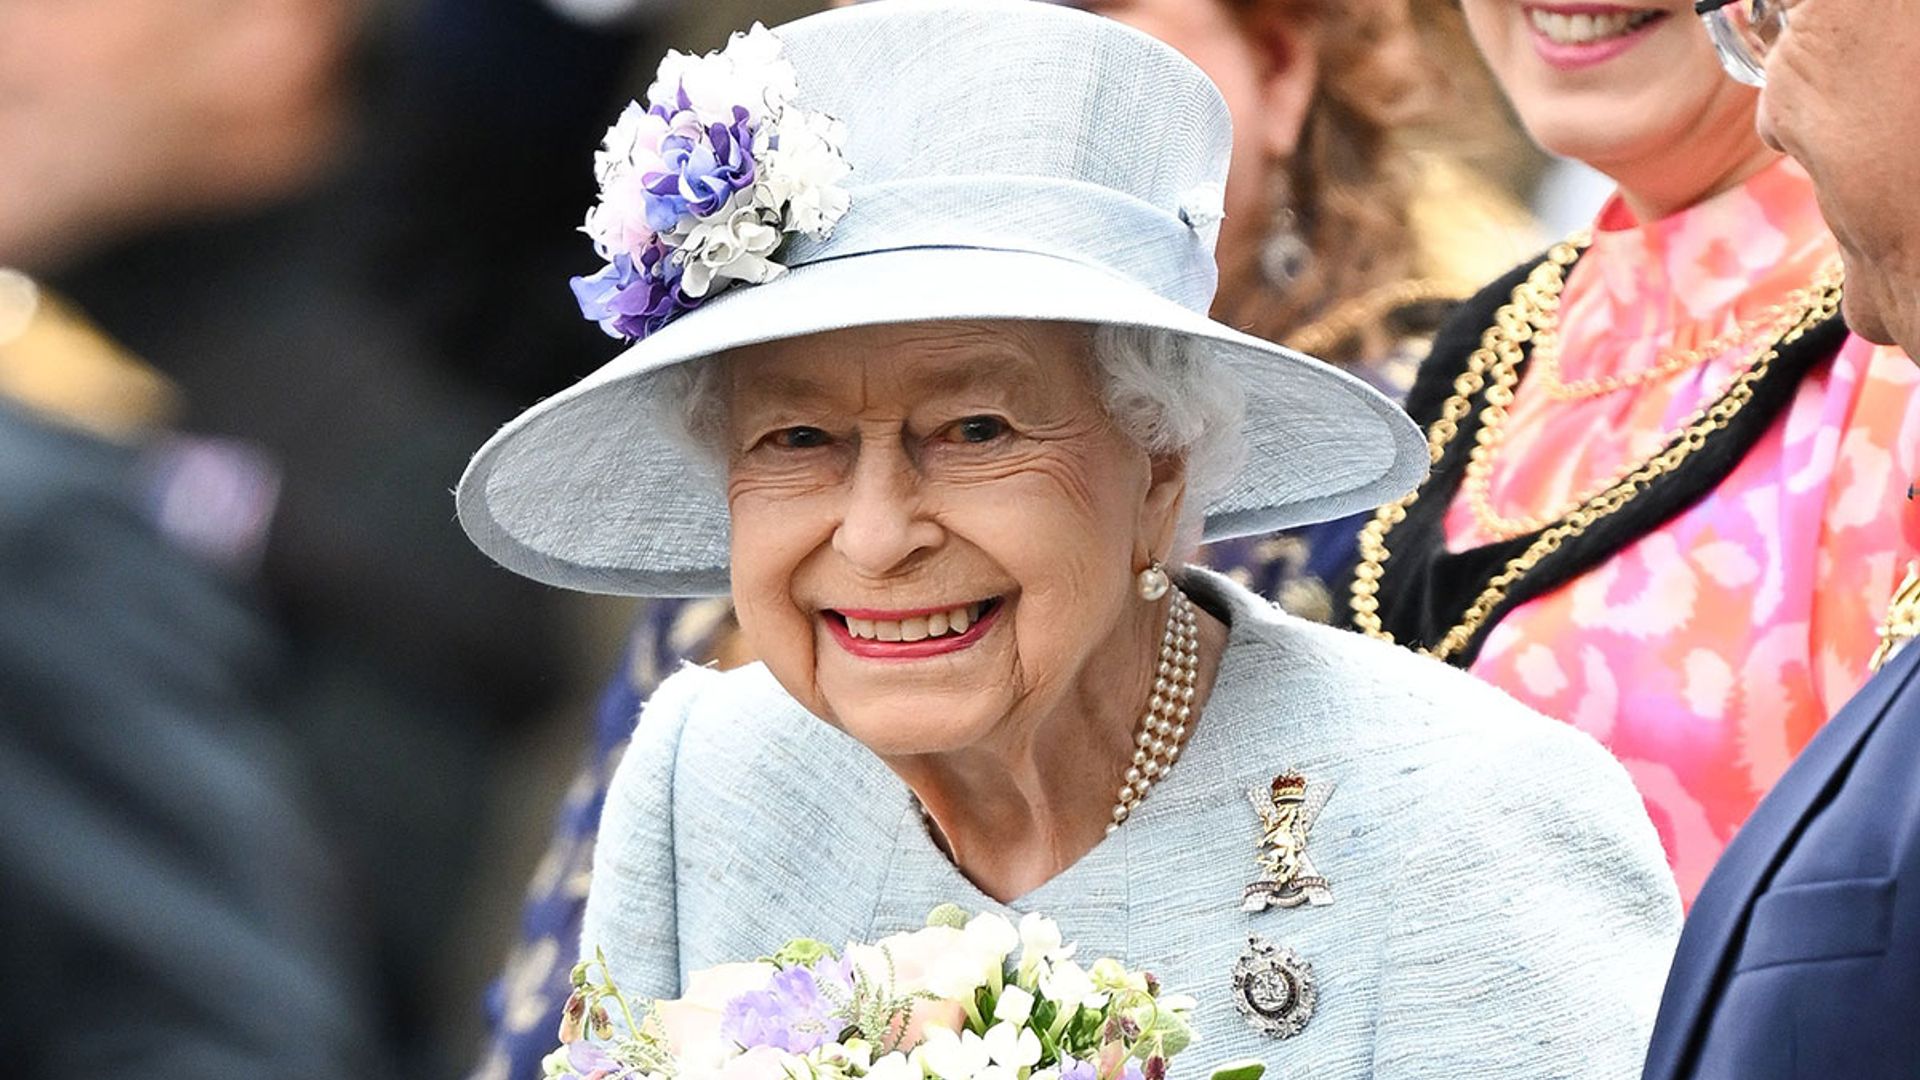 The Queen carries out public engagement in Scotland after uncertainty around her travel plans